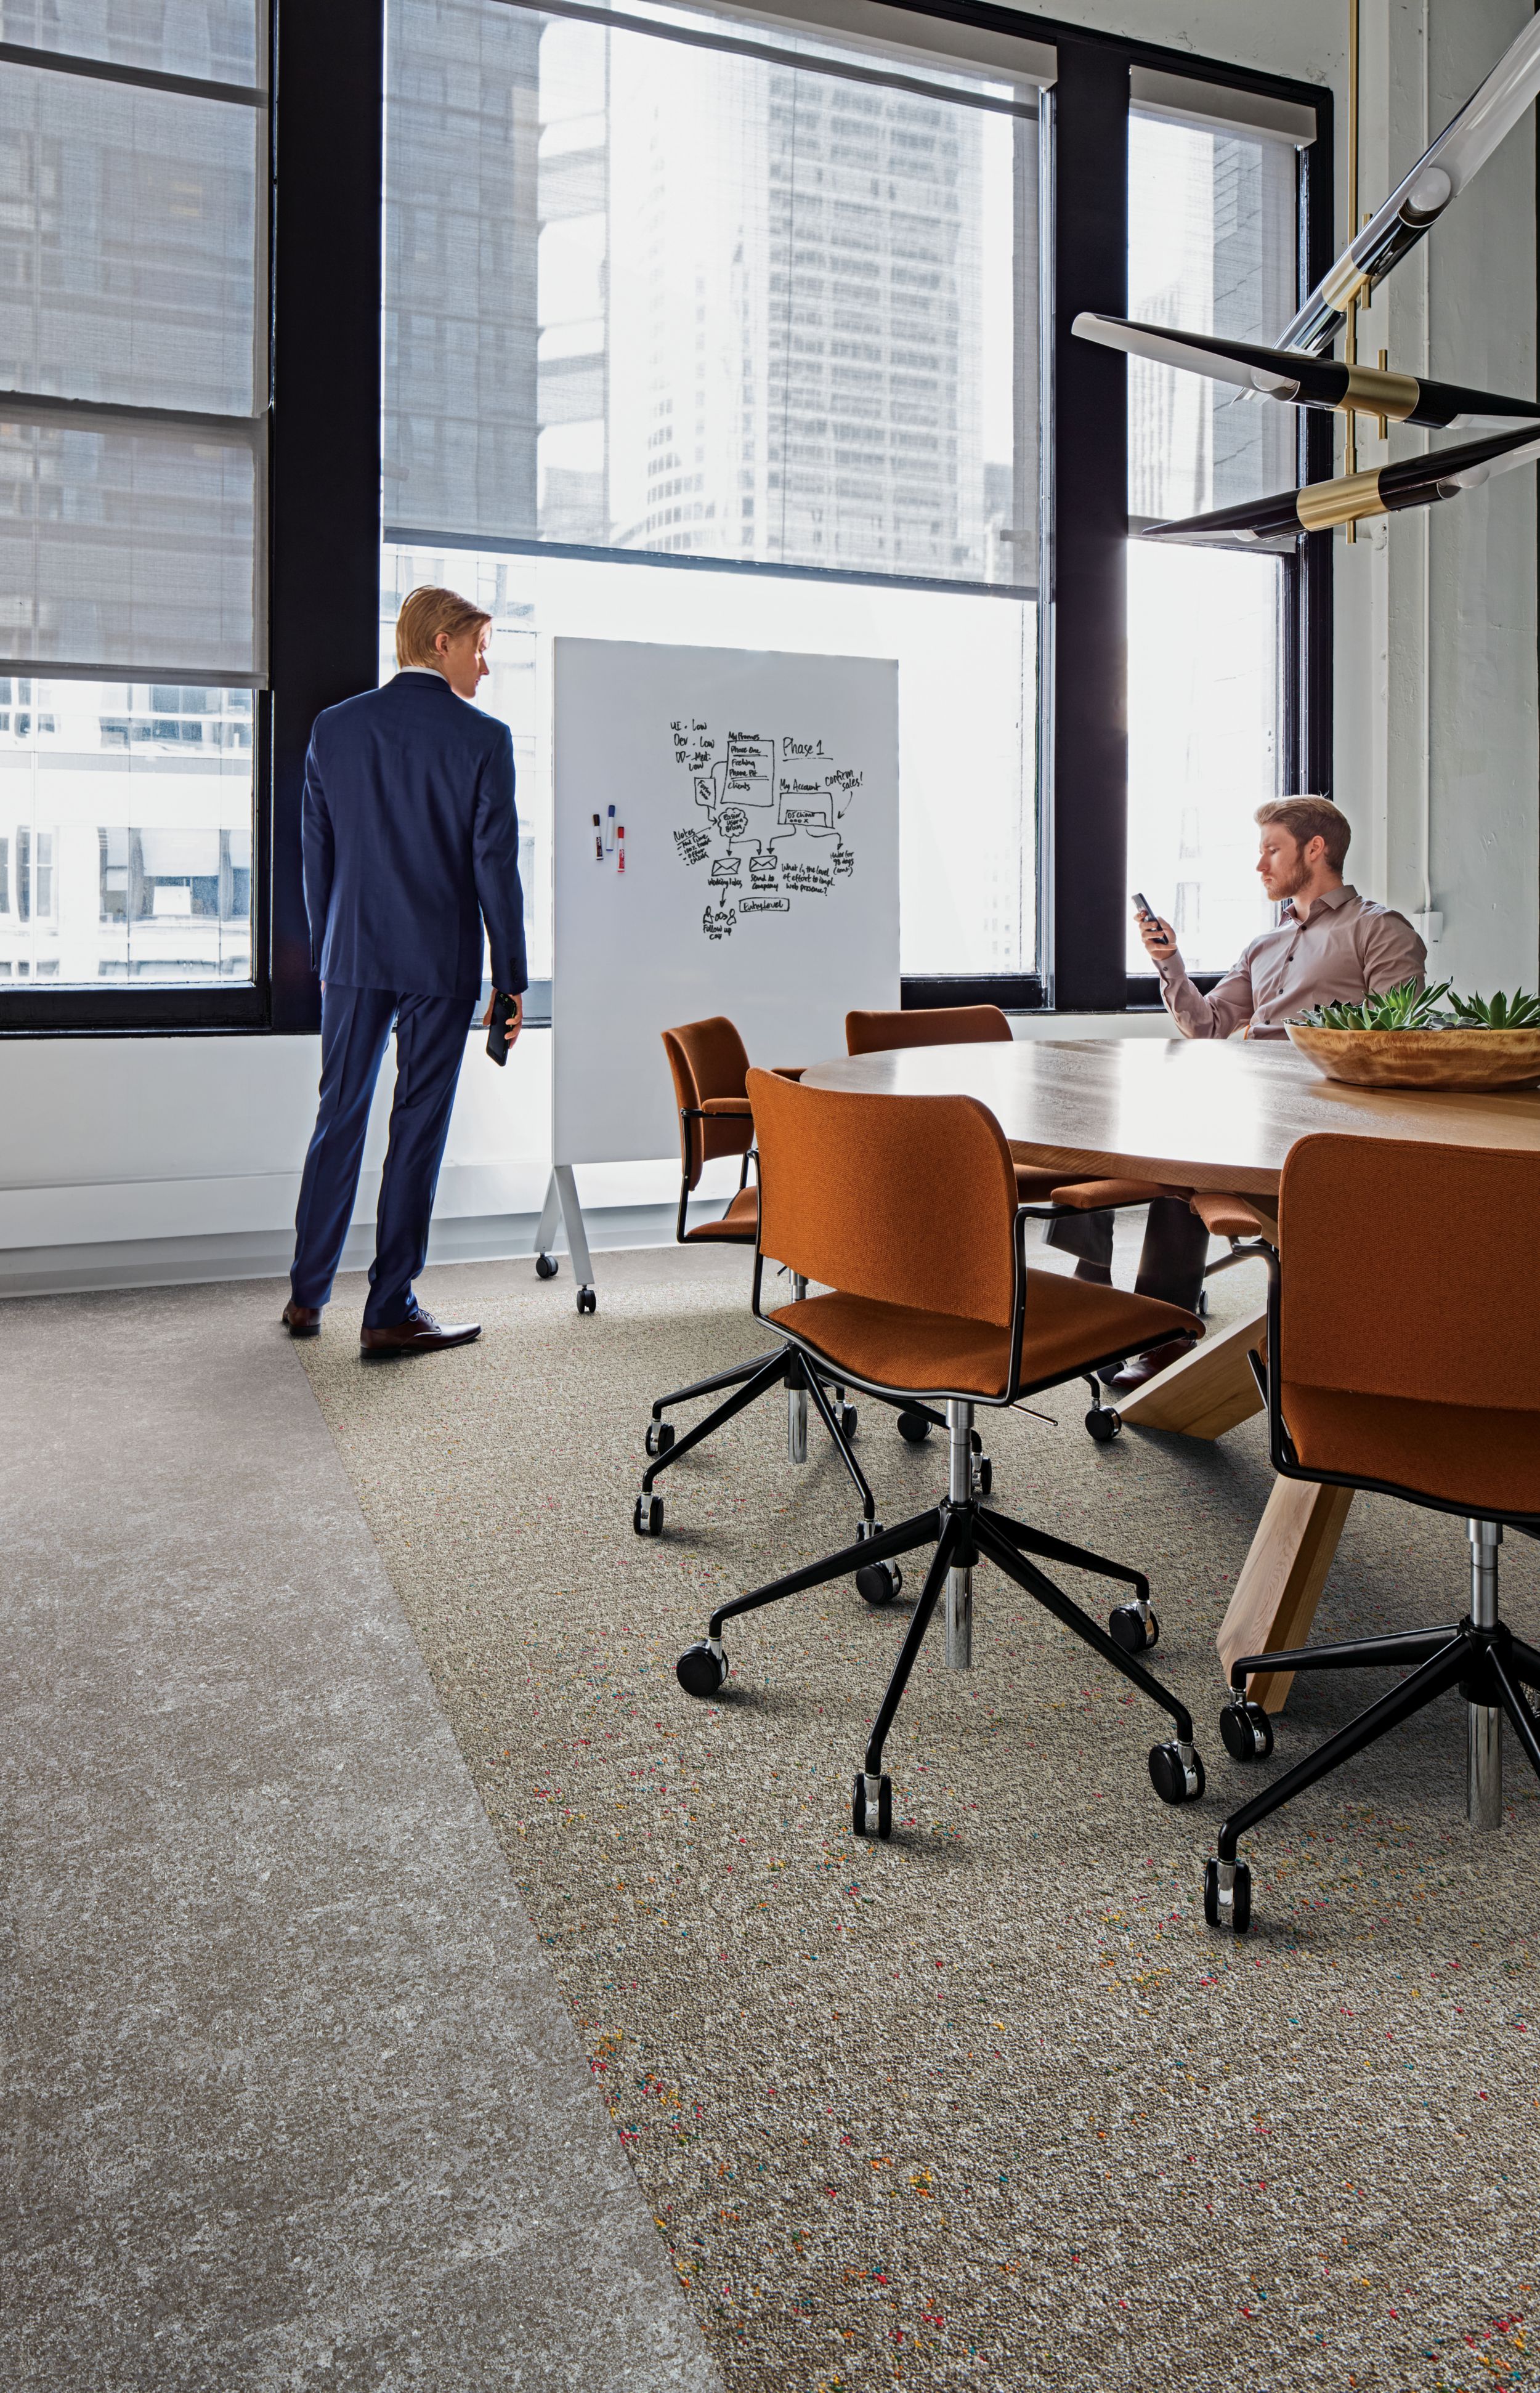 Interface Walk of Life LVT and Step Aside carpet tile in meeting space with conference table and chairs Bildnummer 3